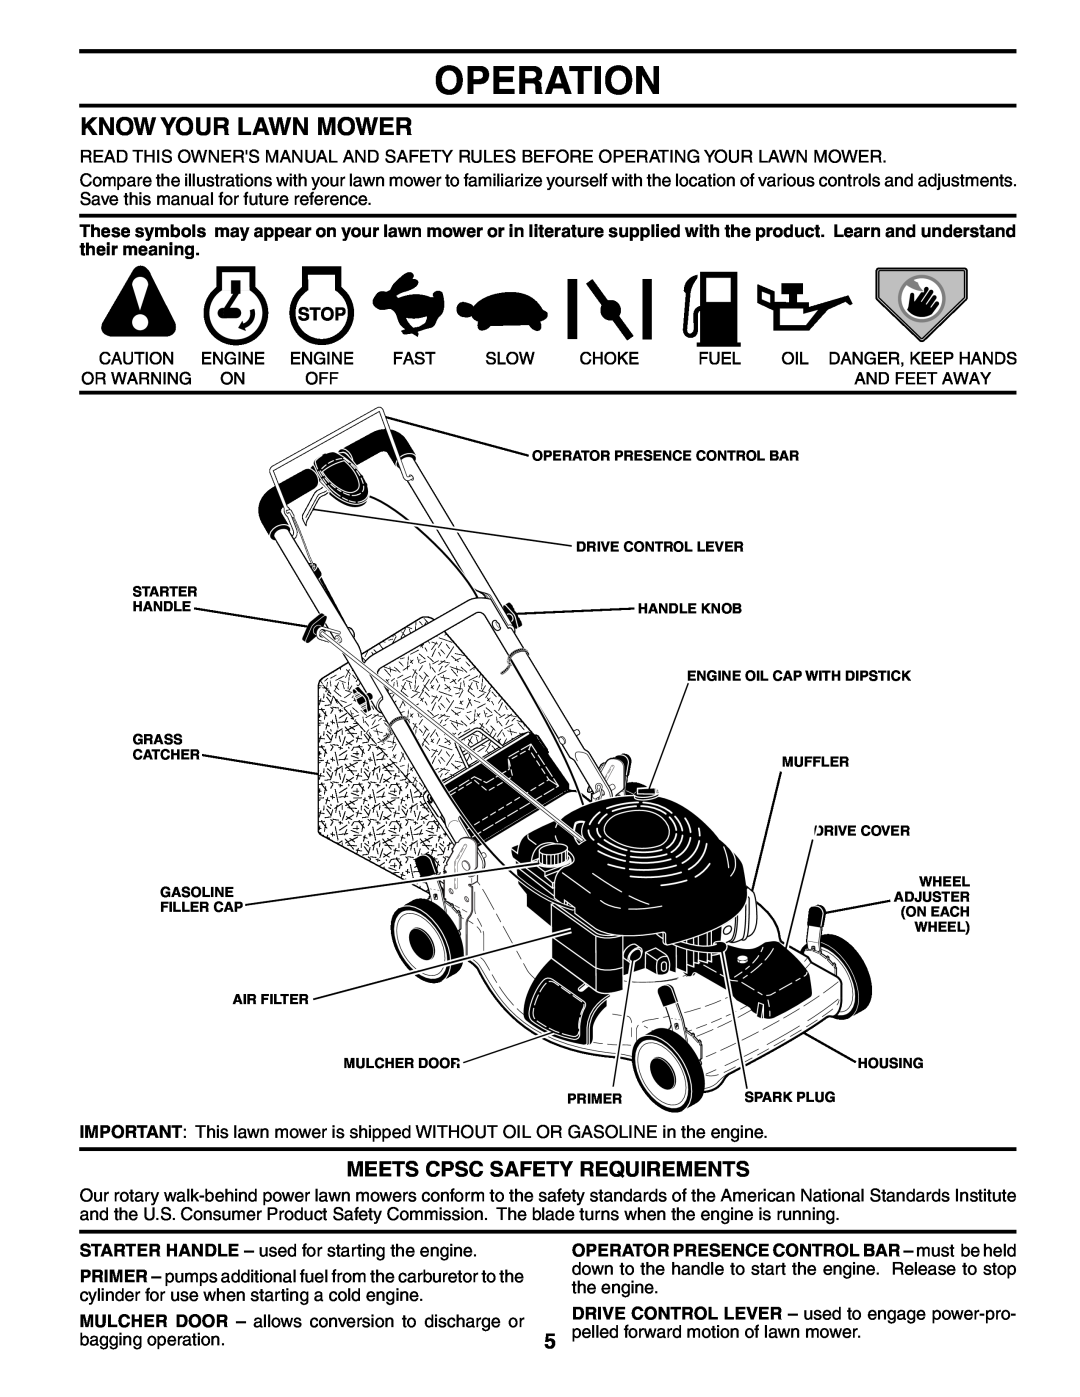 Husqvarna 917.37535 owner manual Operation, Know Your Lawn Mower, Meets Cpsc Safety Requirements 